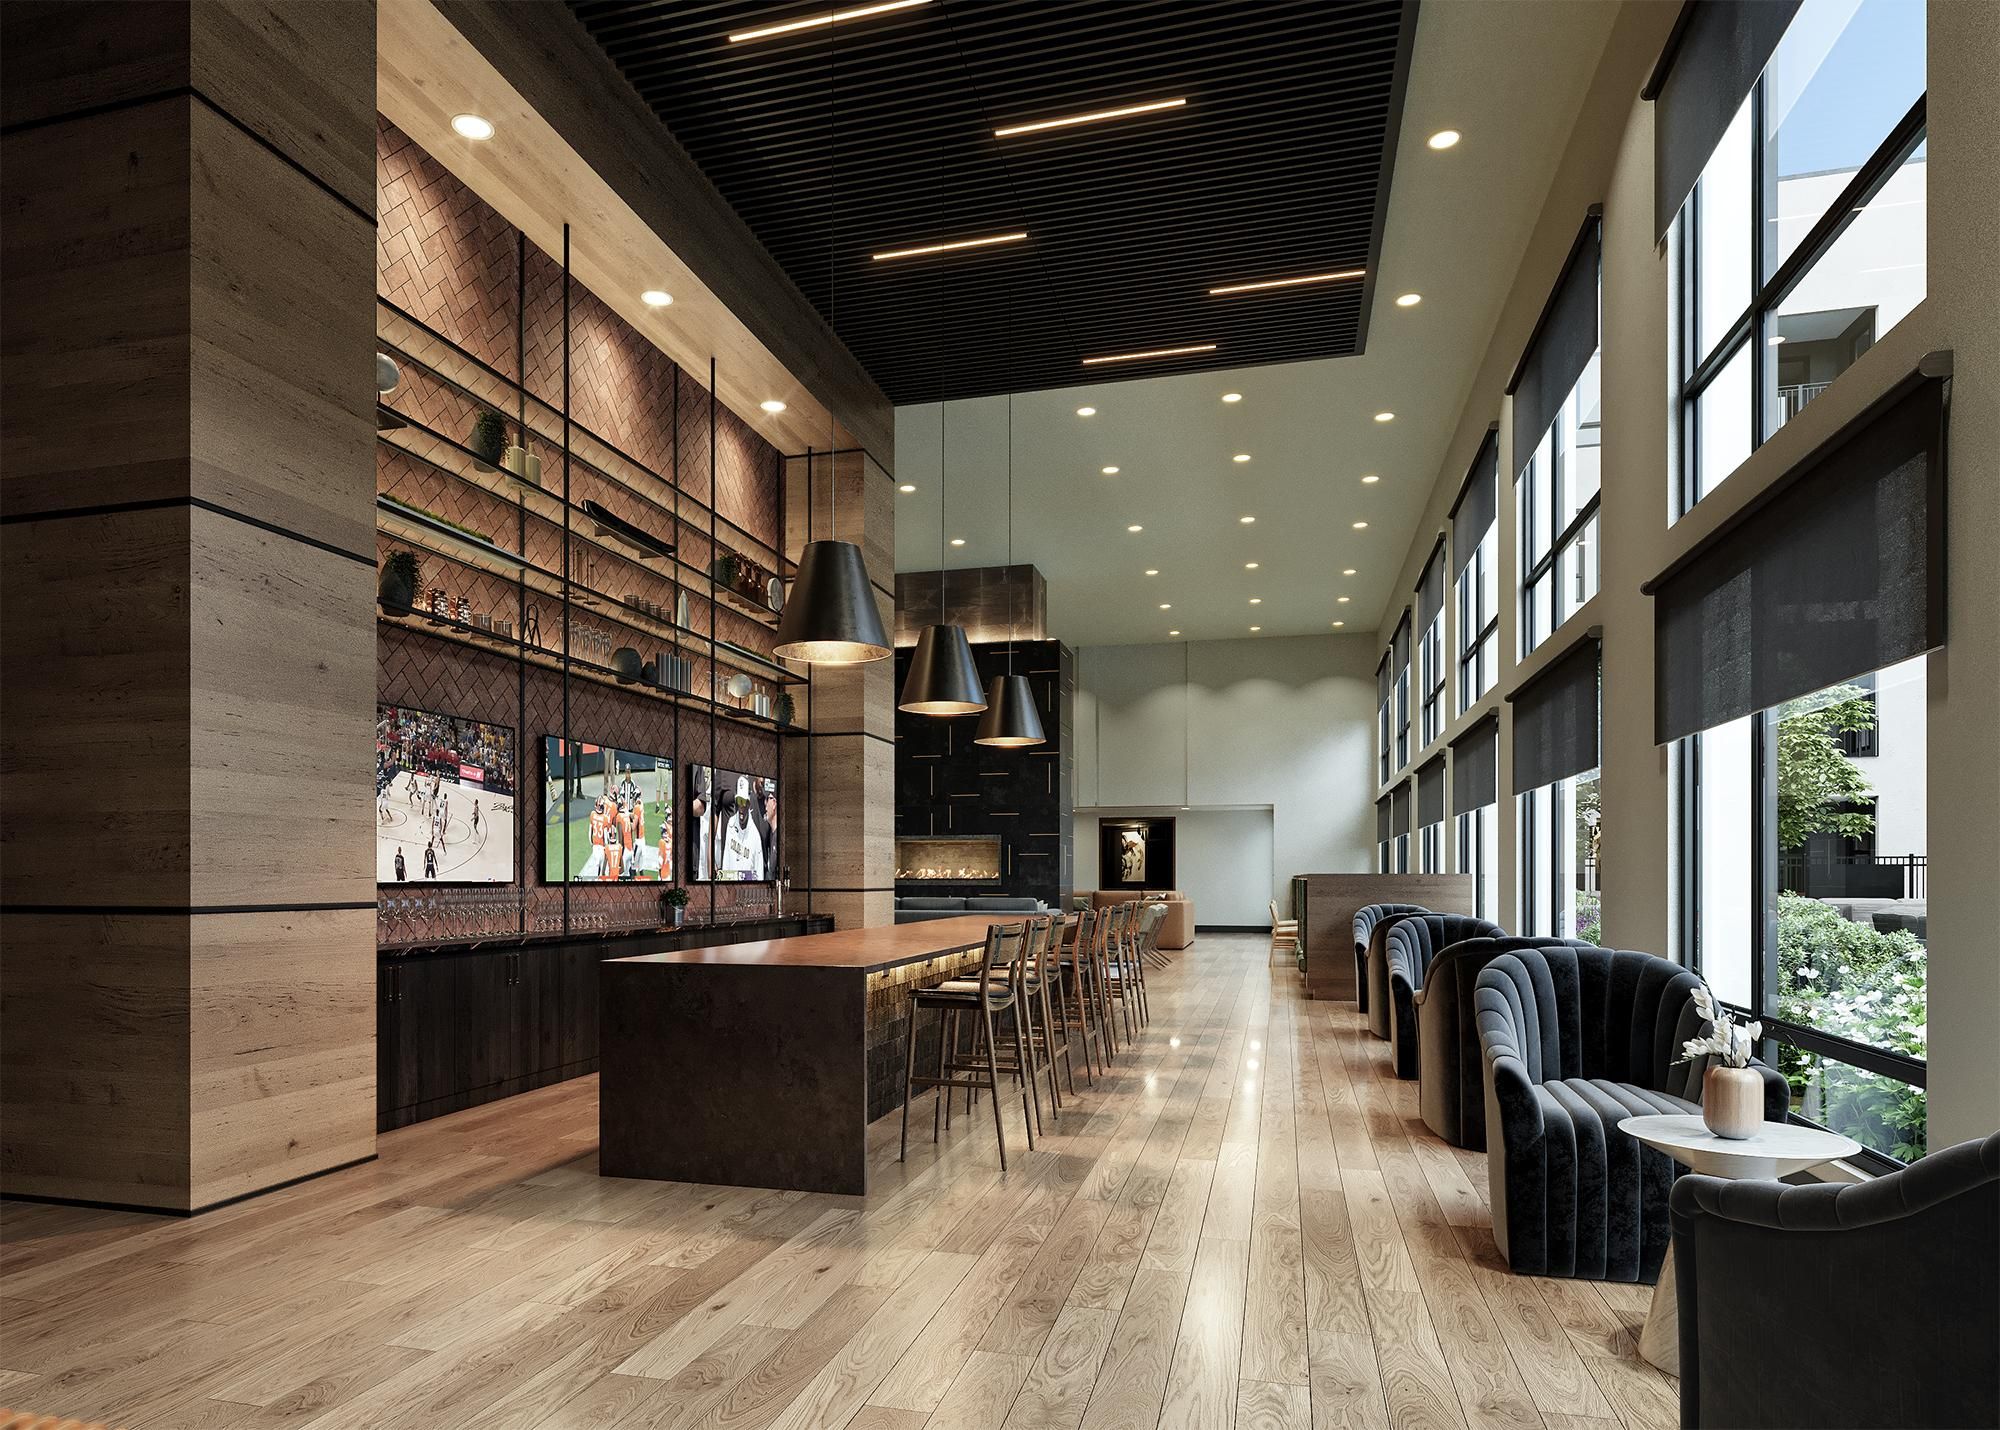 Modern bar area in Solana Central Park featuring dark wood tones, pendant lighting, and a series of screens displaying sports.